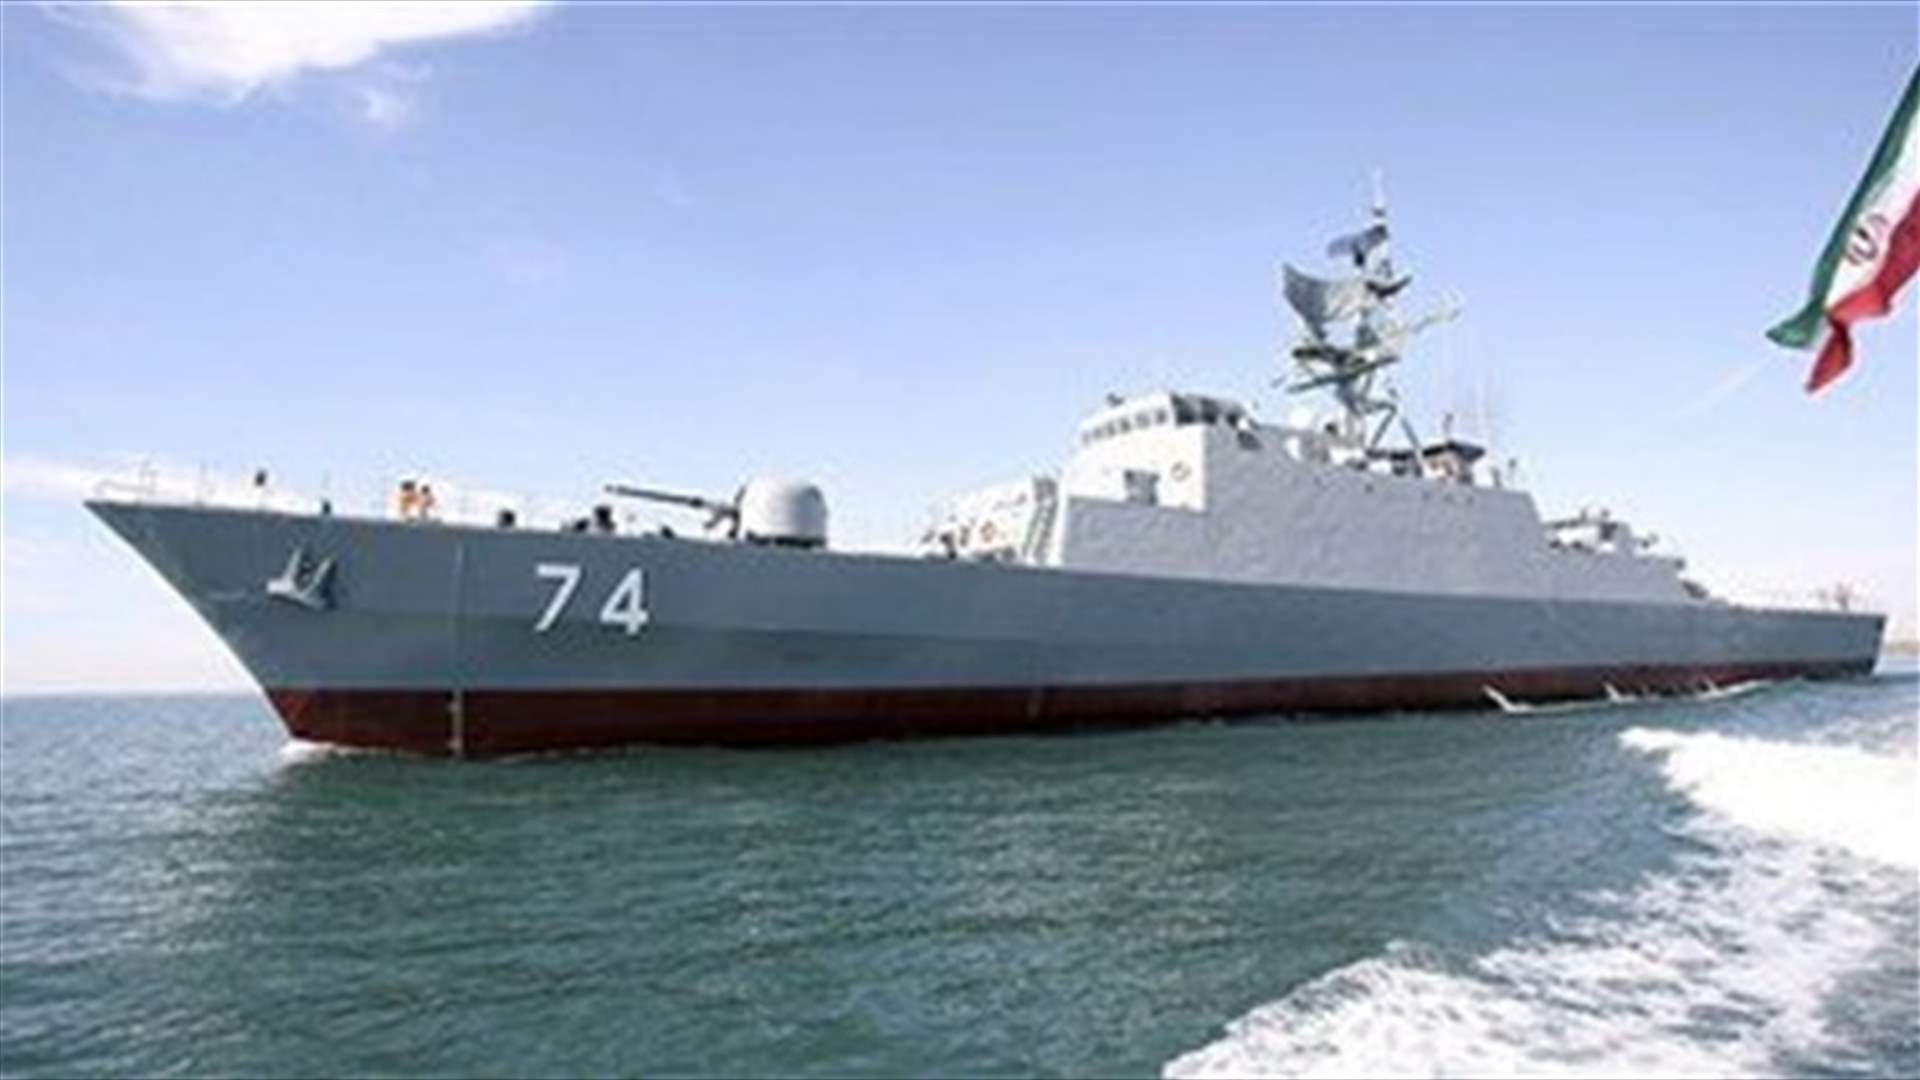 After US warning, Iran says its navy will still operate in Gulf